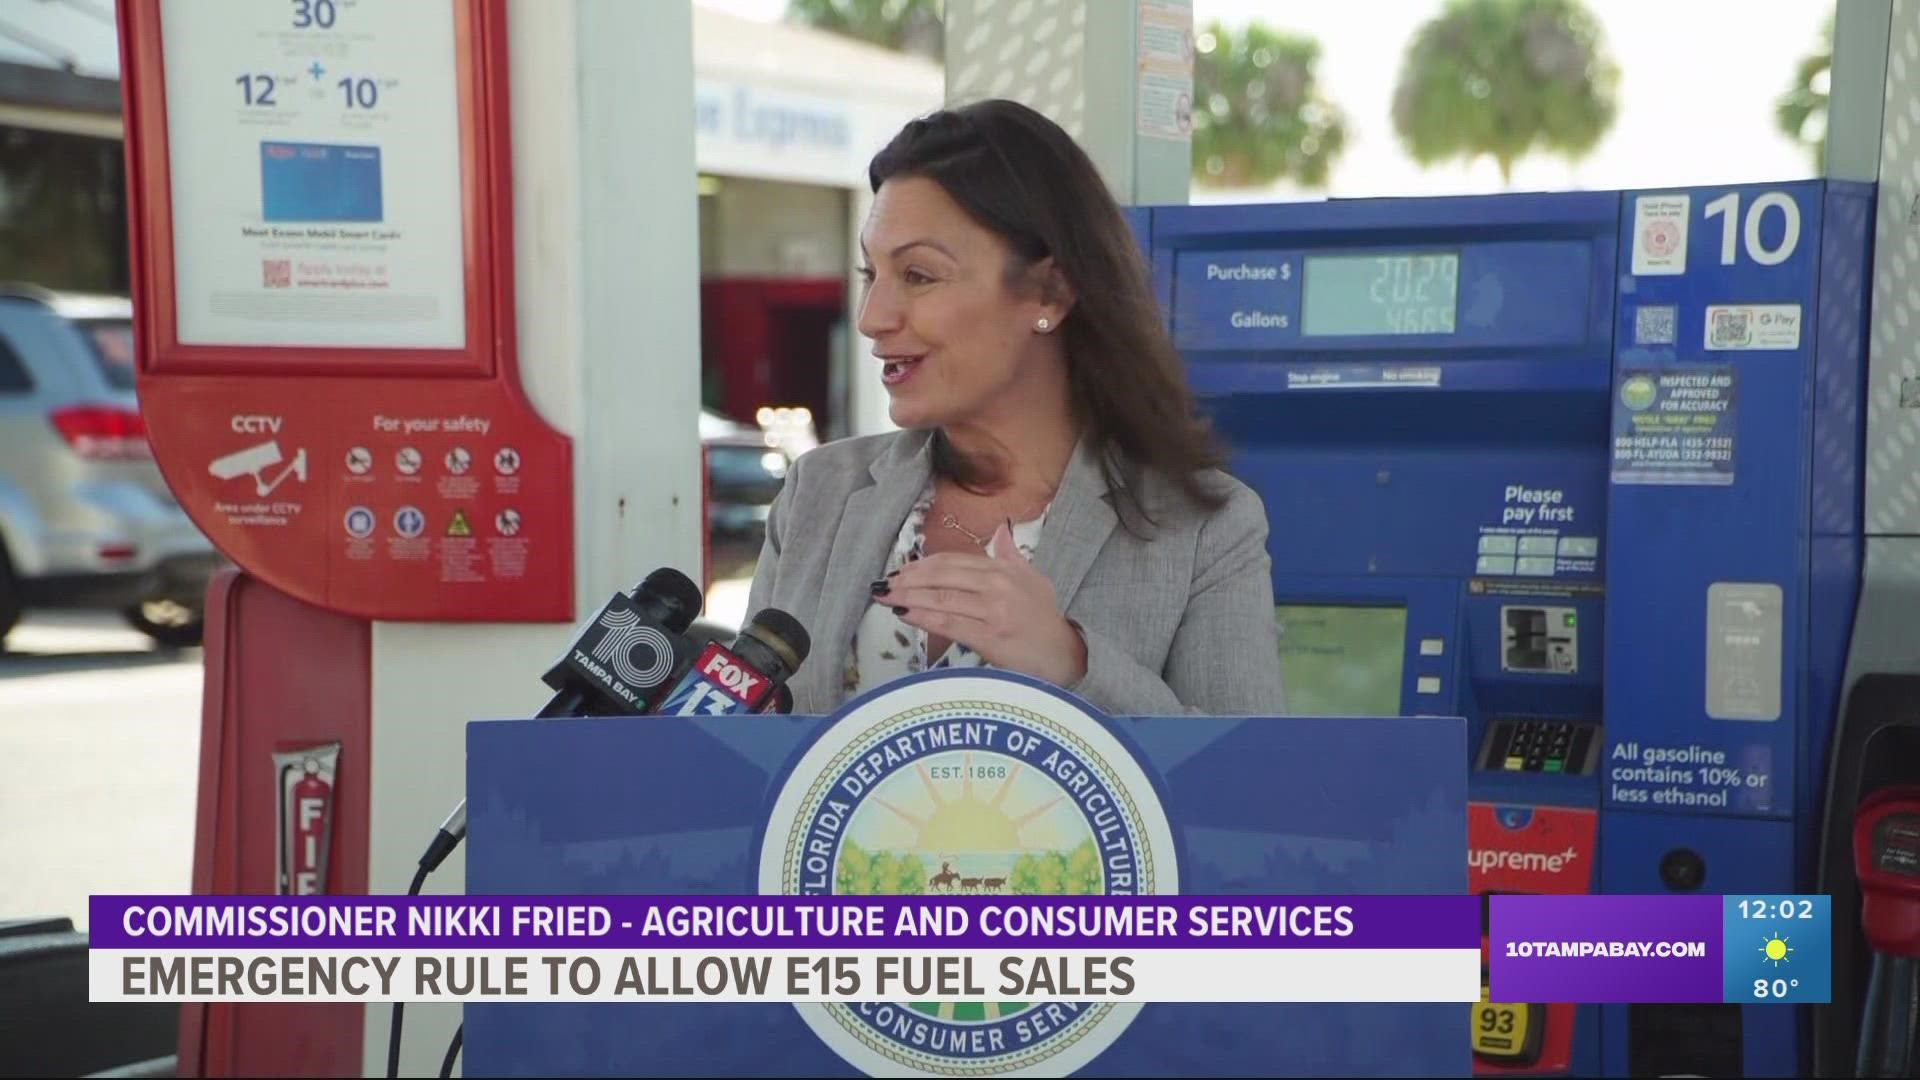 Fried says people could find savings of 10 cents per gallon, but not many gas stations sell the E15 fuel.